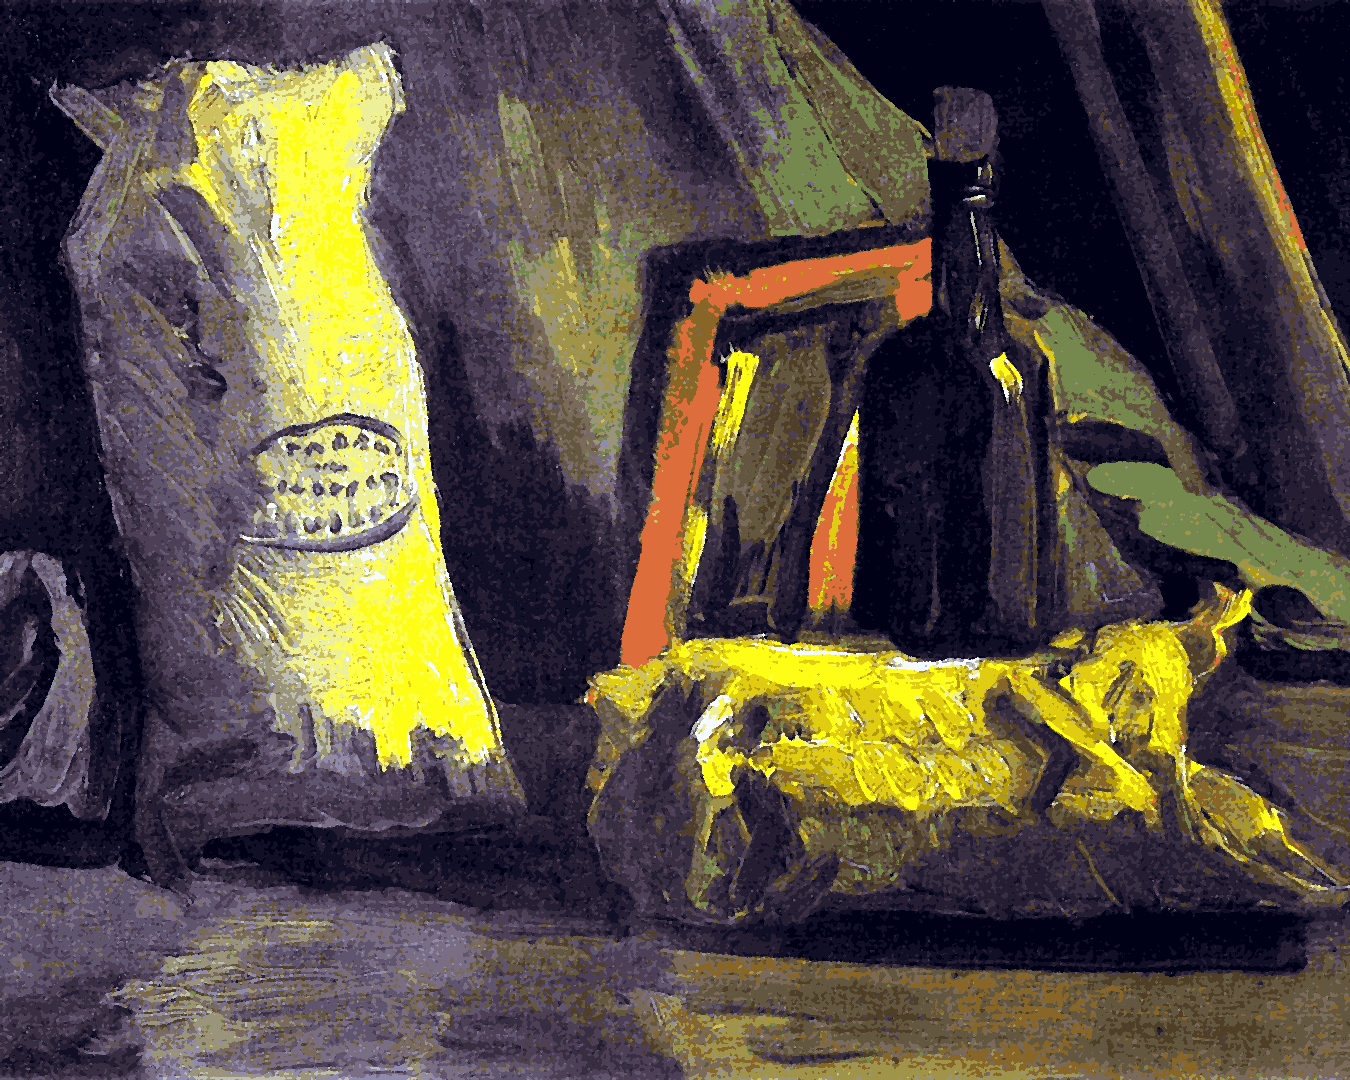 Vincent Van Gogh PD - (134) - Still Life with Two Sacks and a Bottle - Van-Go Paint-By-Number Kit